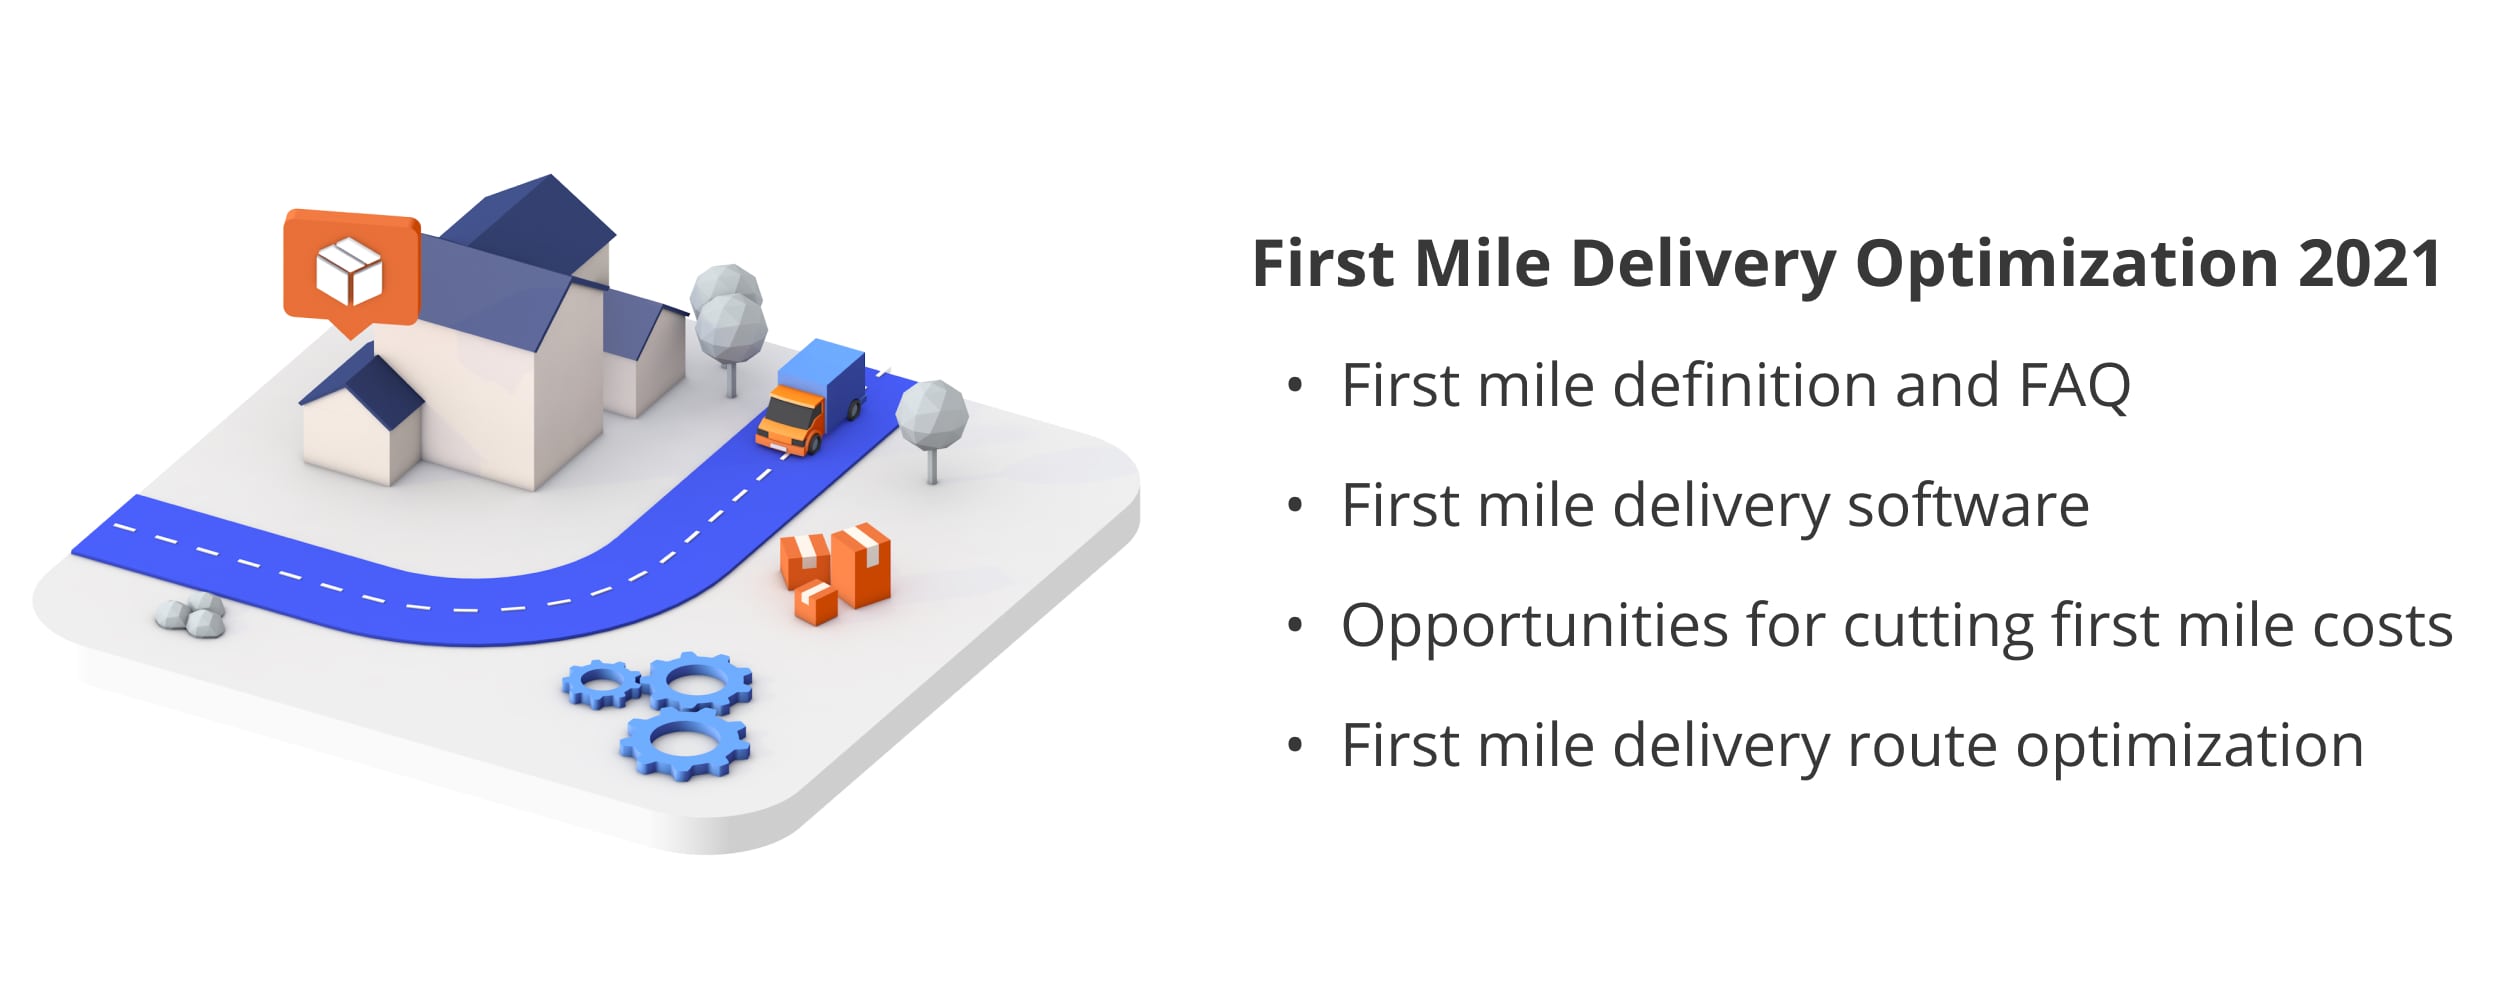 First mile delivery optimization methods, definition, and frequently asked questions.